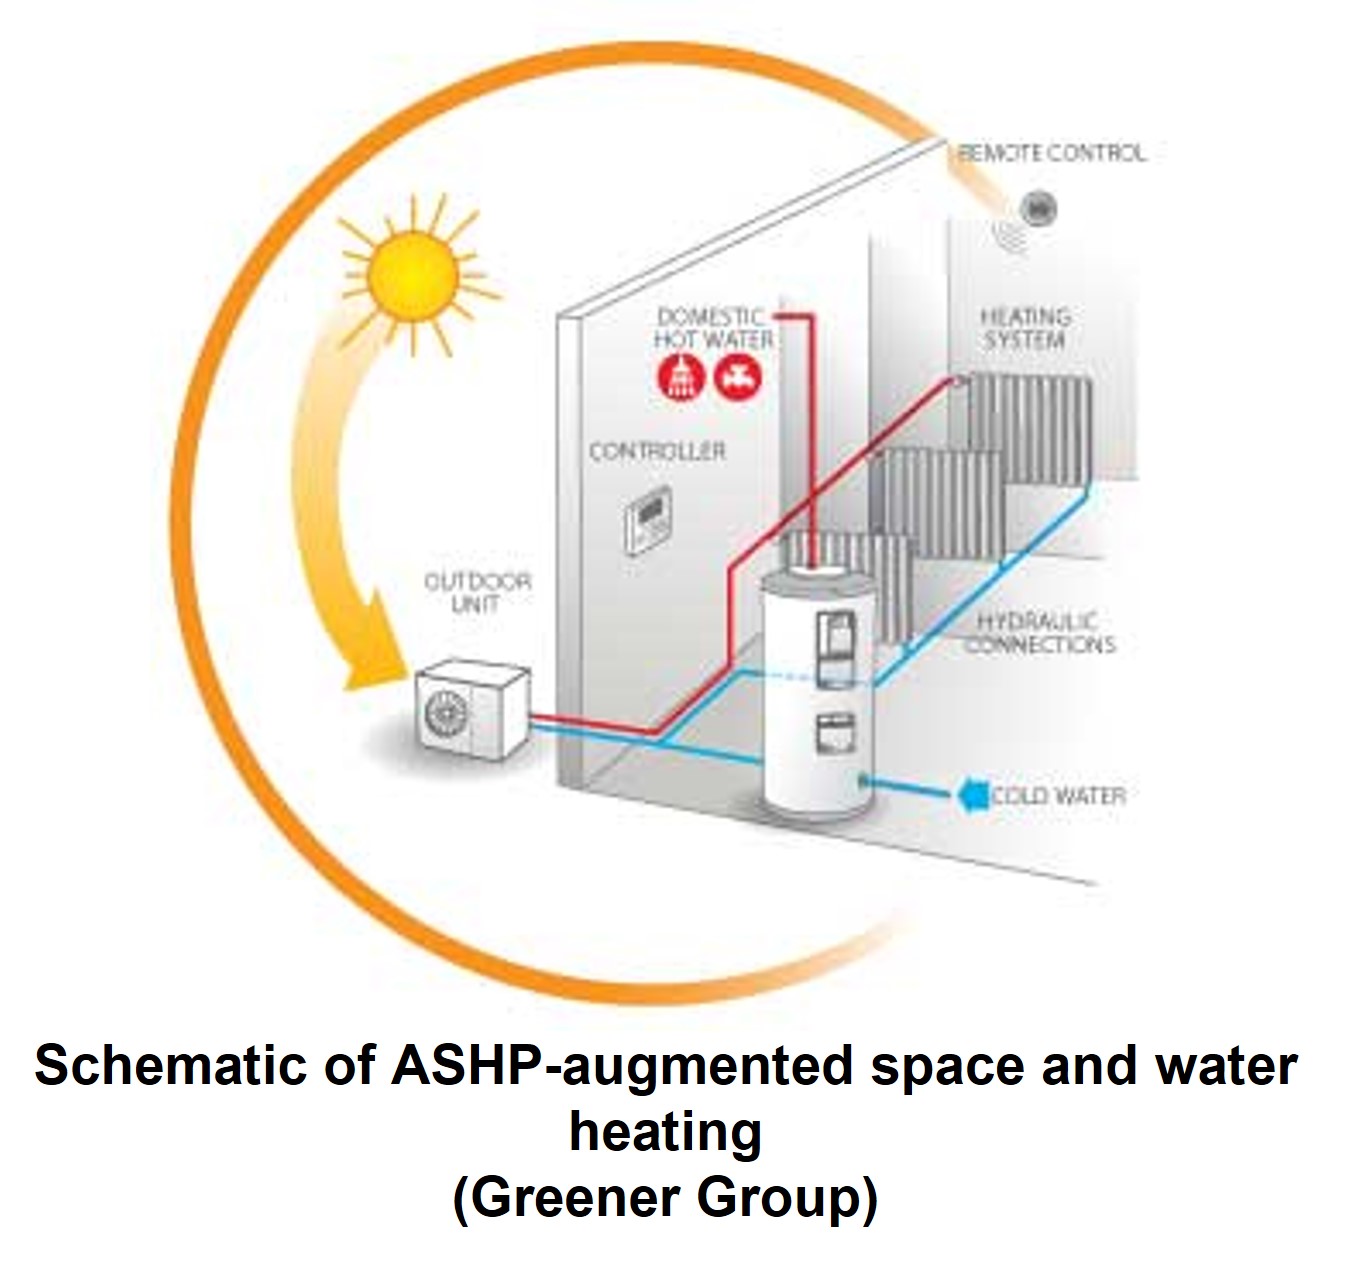 Heat pumps take on direct electric heating in London